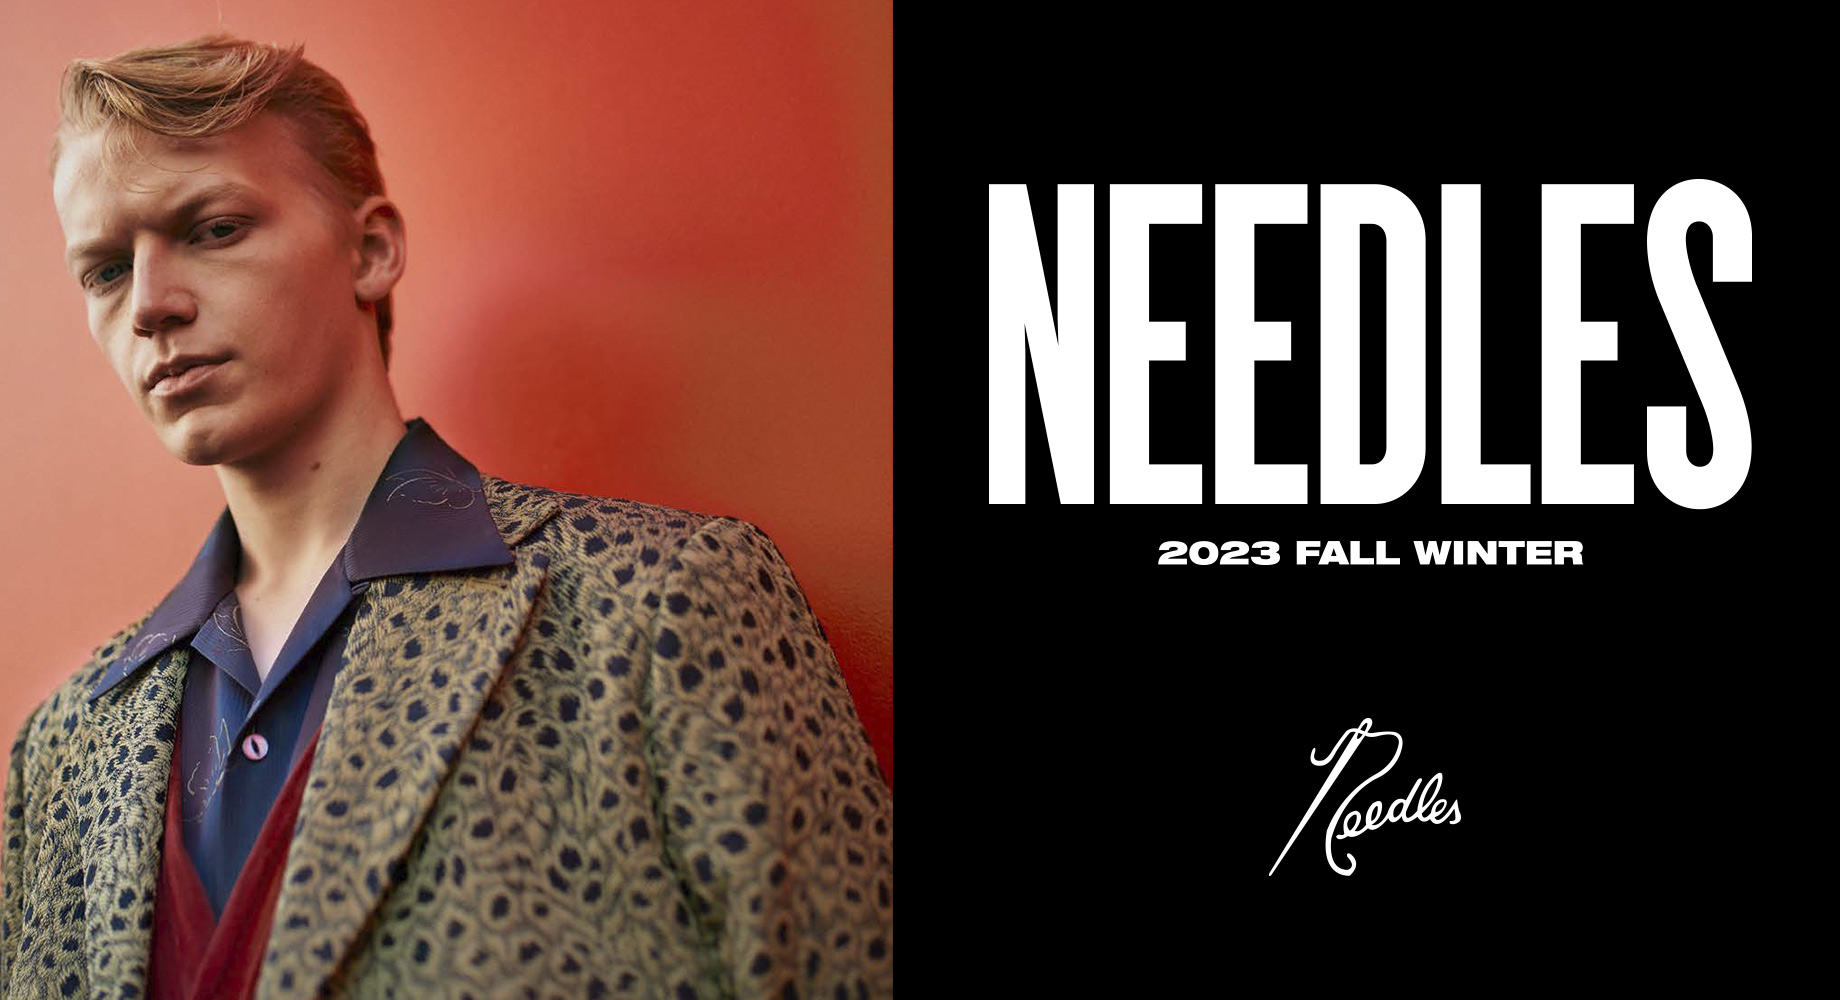 〈NEEDLES〉2023 FALL WINTER COLLECTION